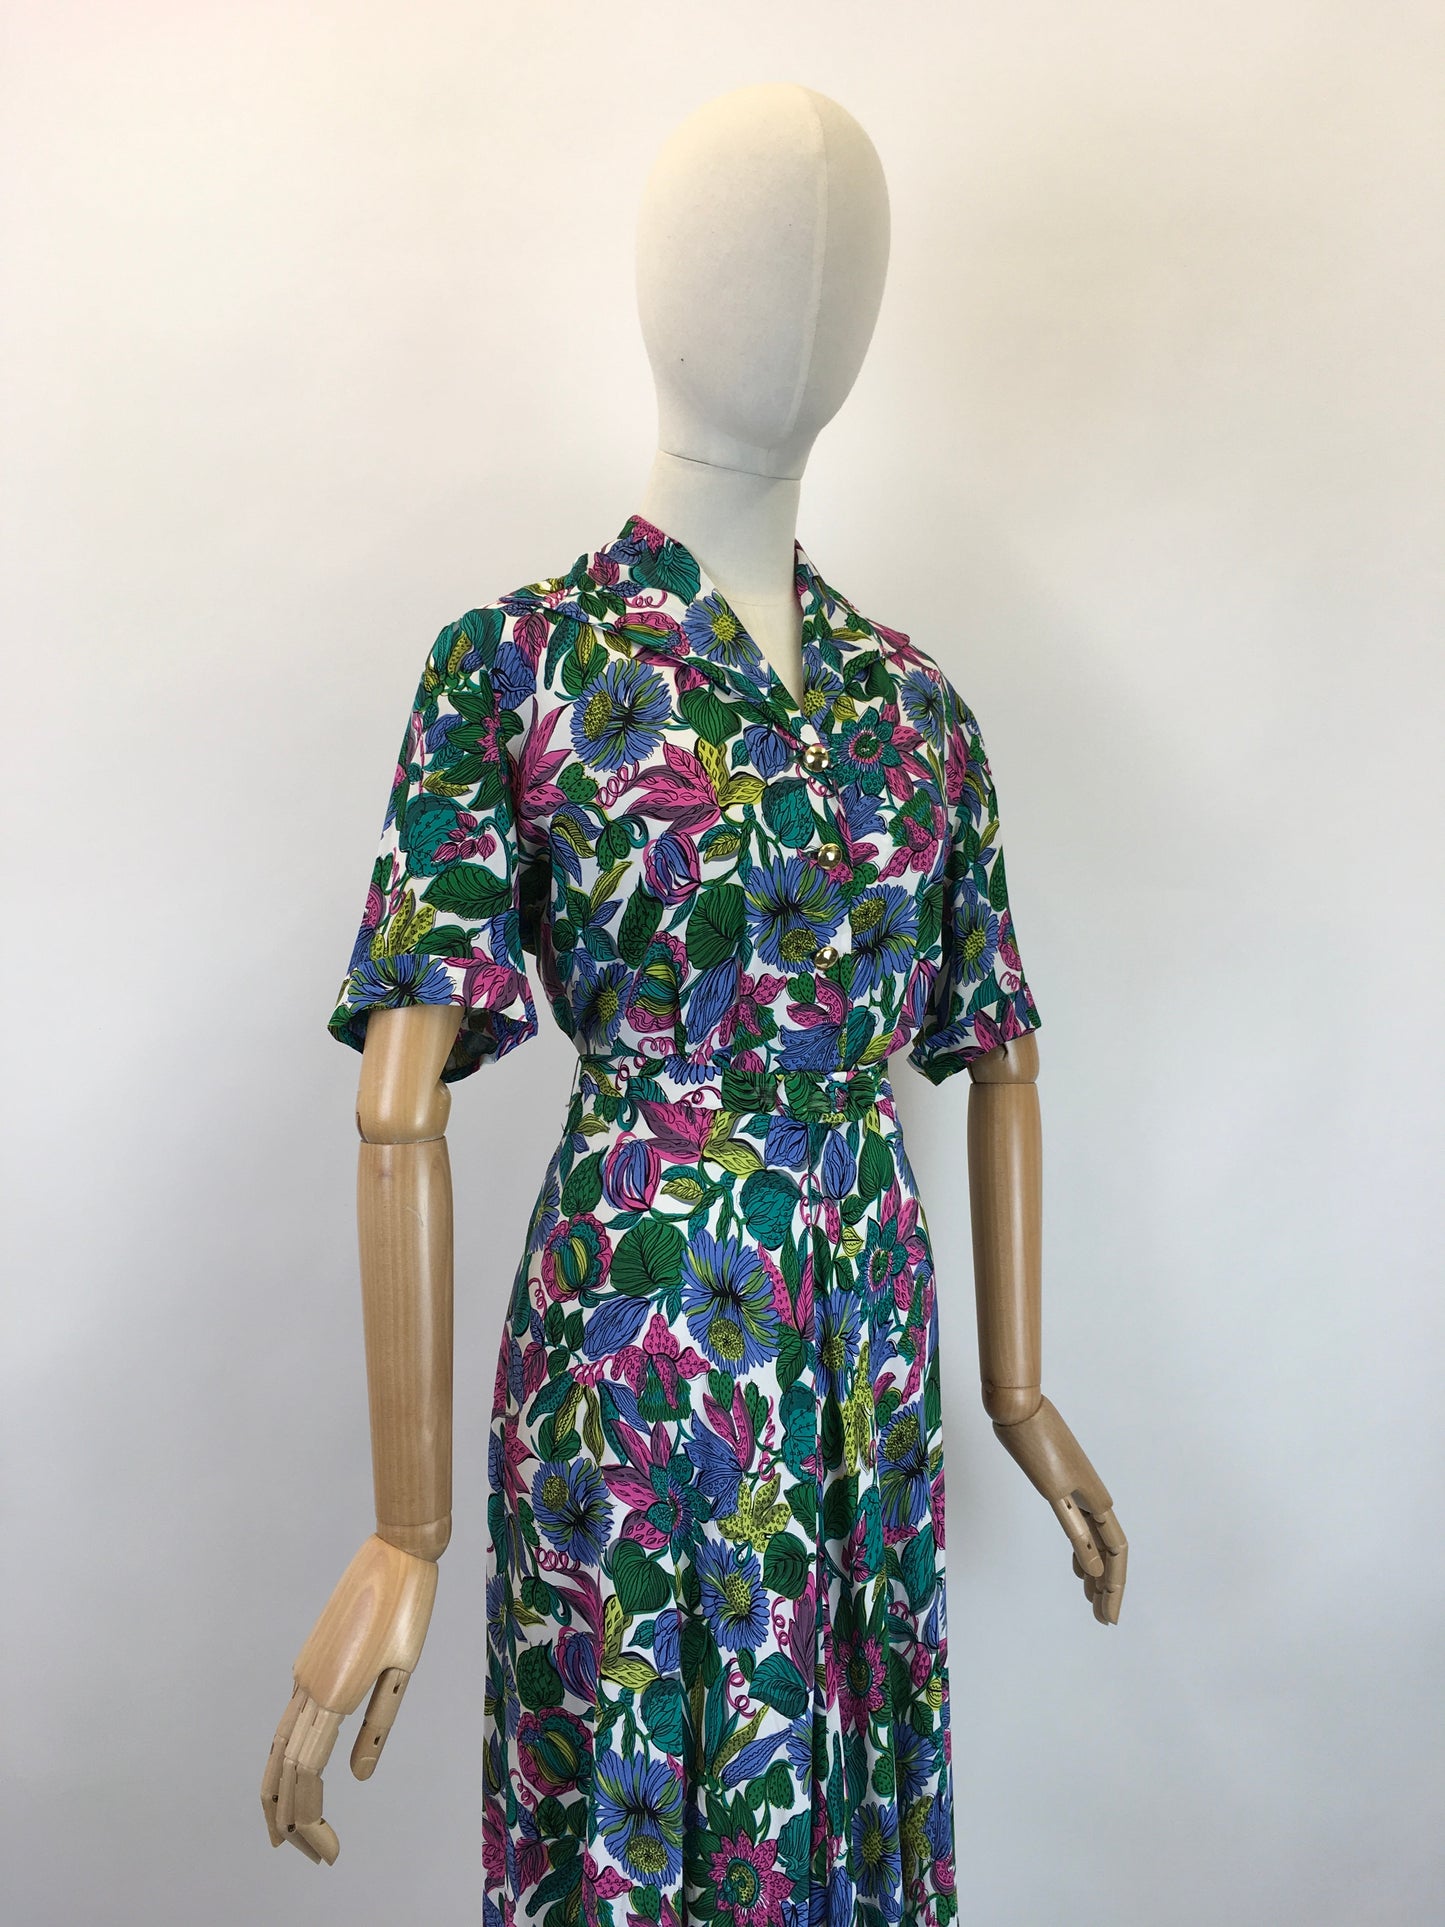 Original 1940's Sensational Floral Rayon Dress - In Fabulous Pops of Greens, Blue, Fuchsia, Chartreuse and Purple